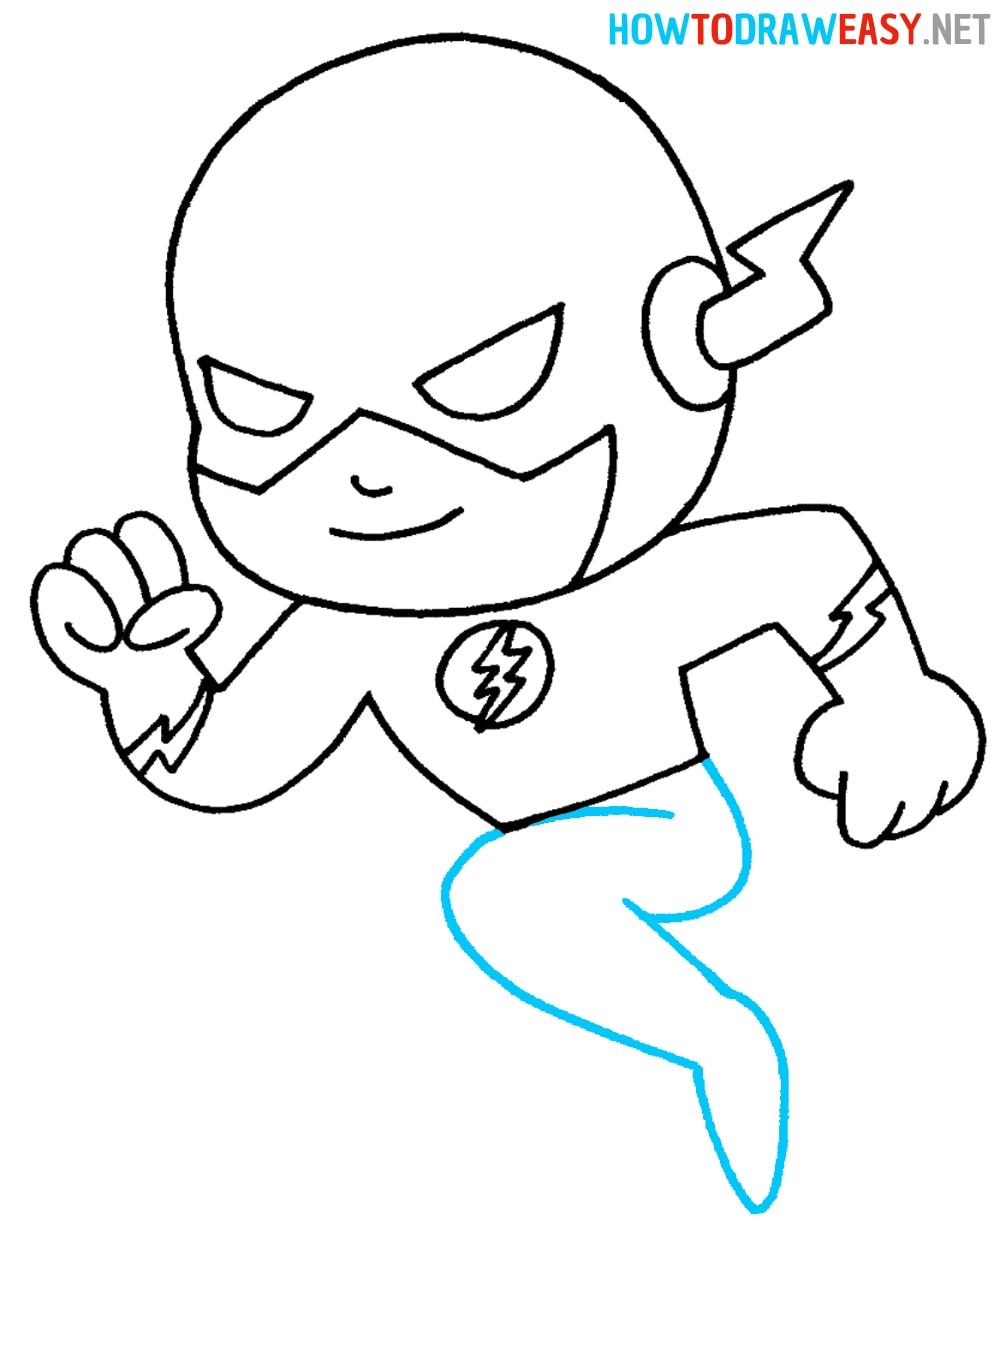 Drawing of the Flash